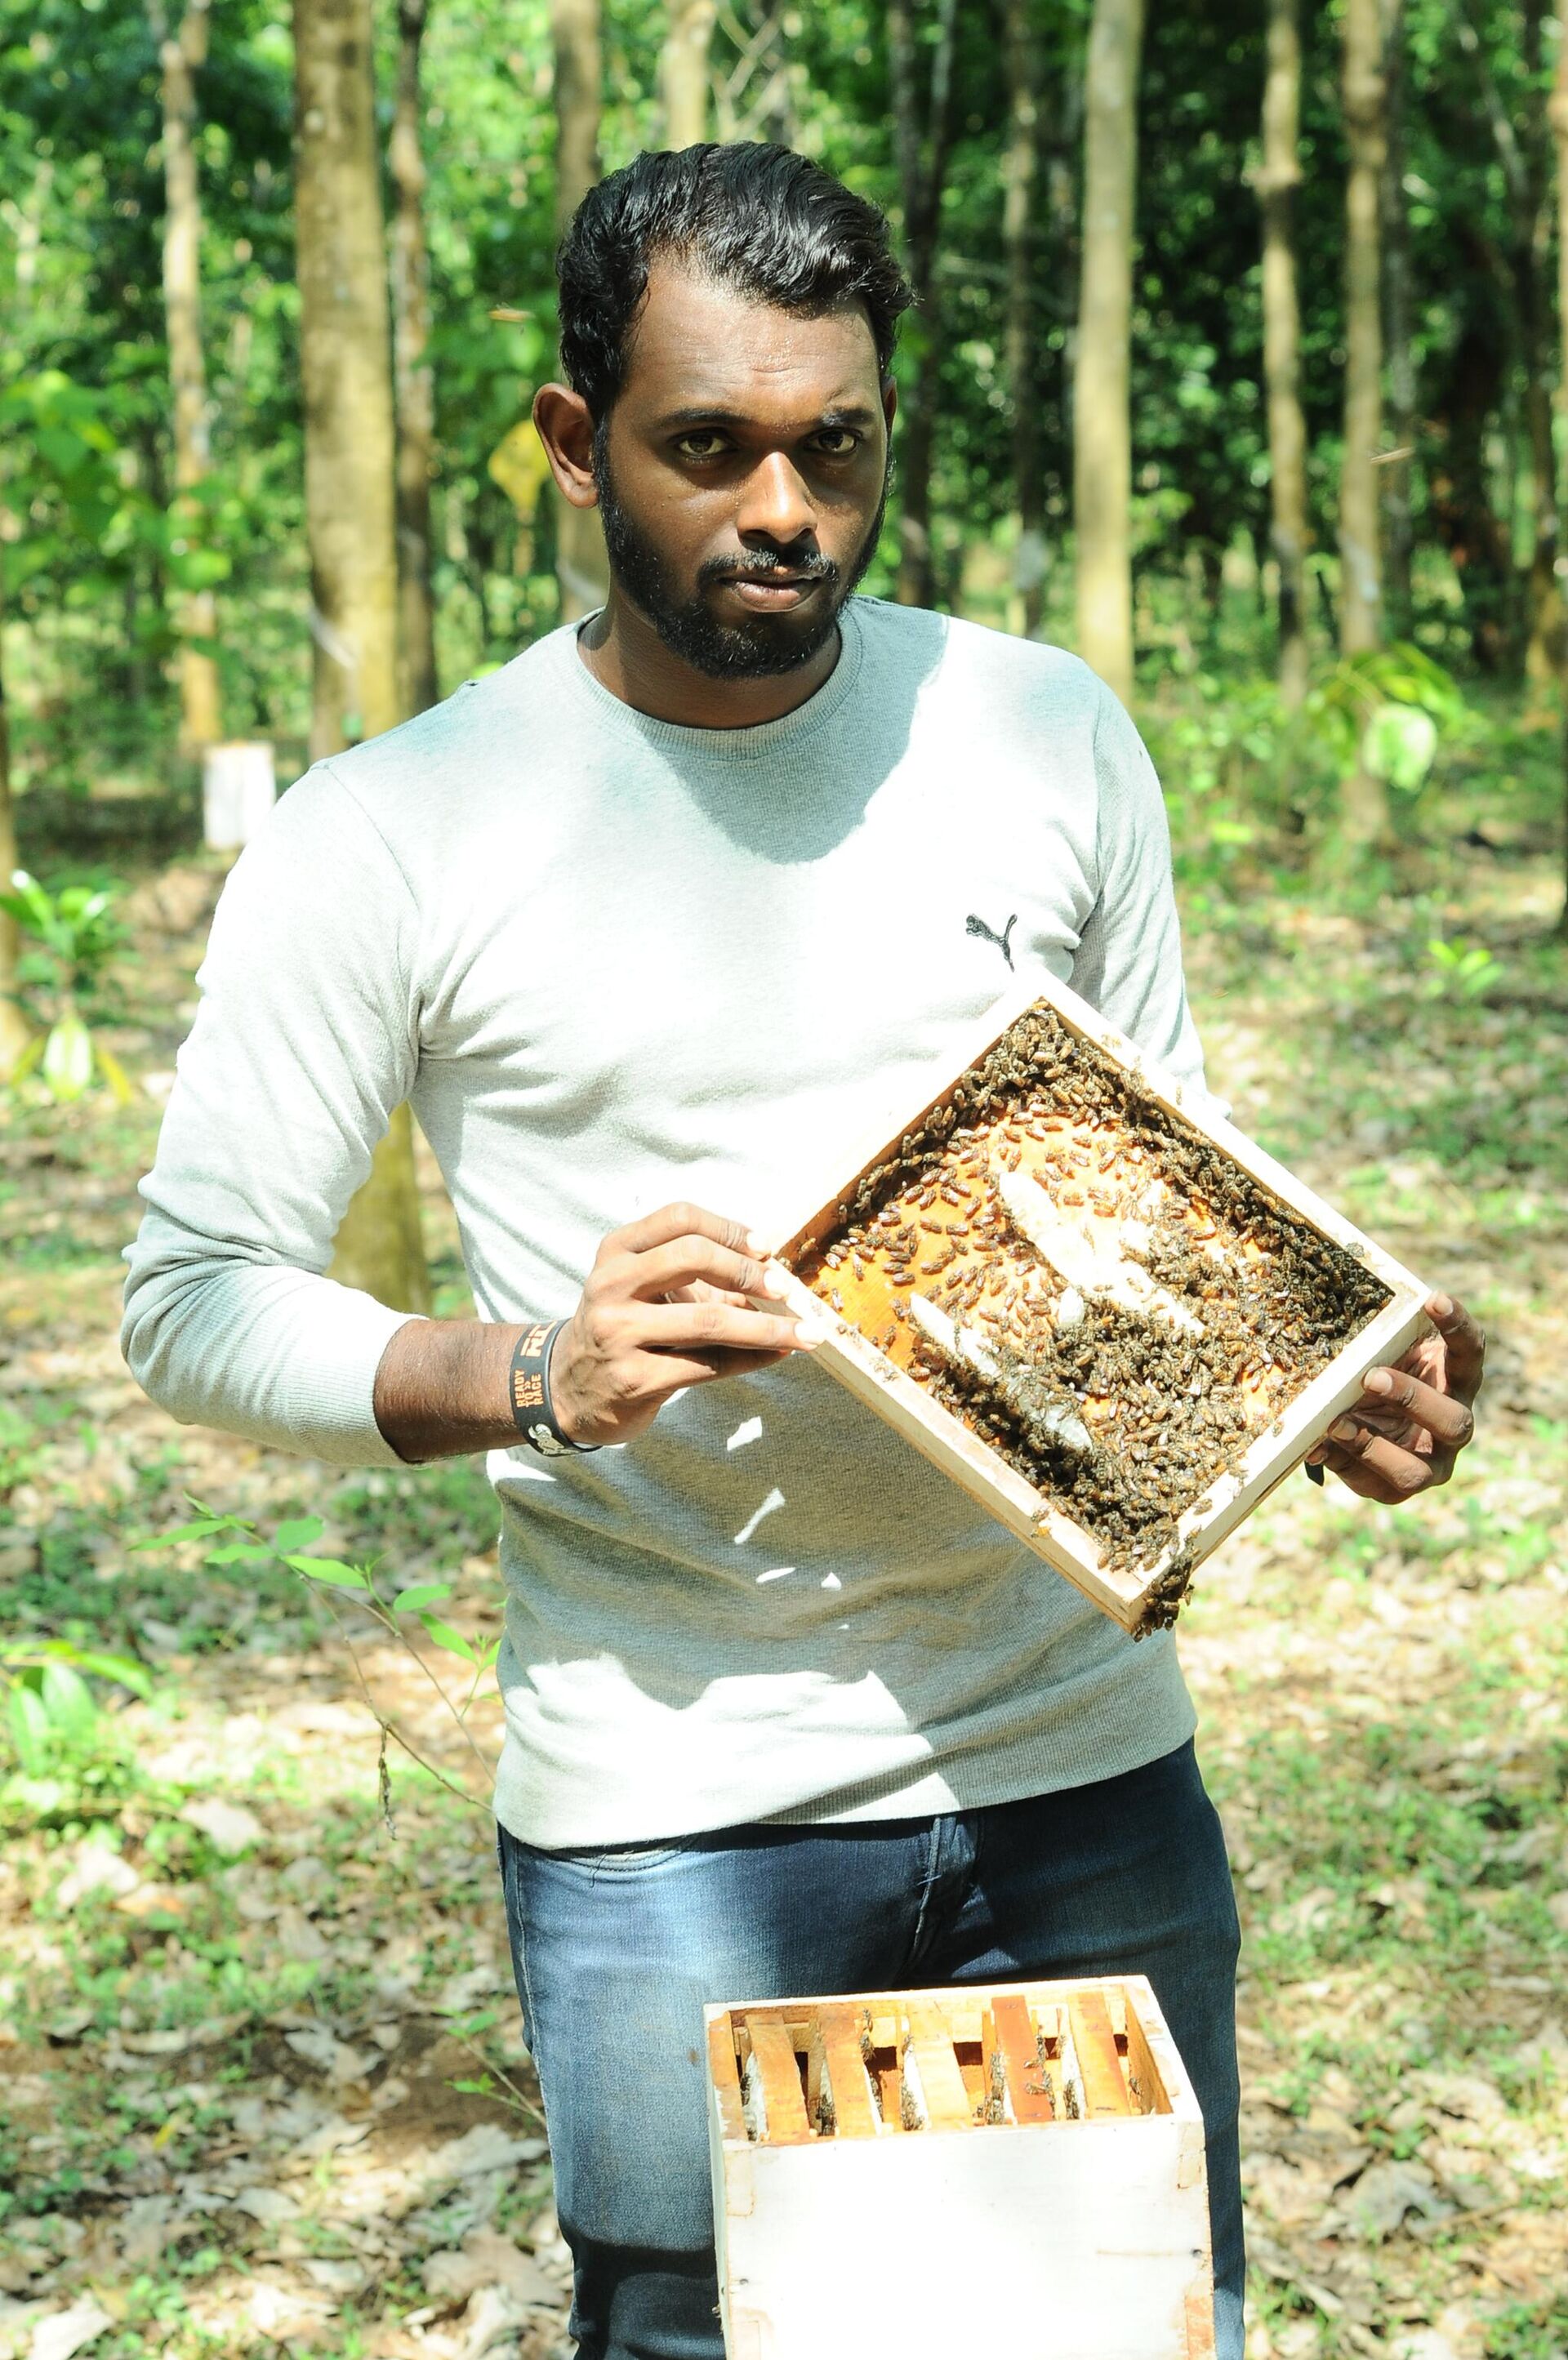 Beekeeper Nature  M.S unveil his face behind swamp of bees  - Sputnik India, 1920, 19.05.2023